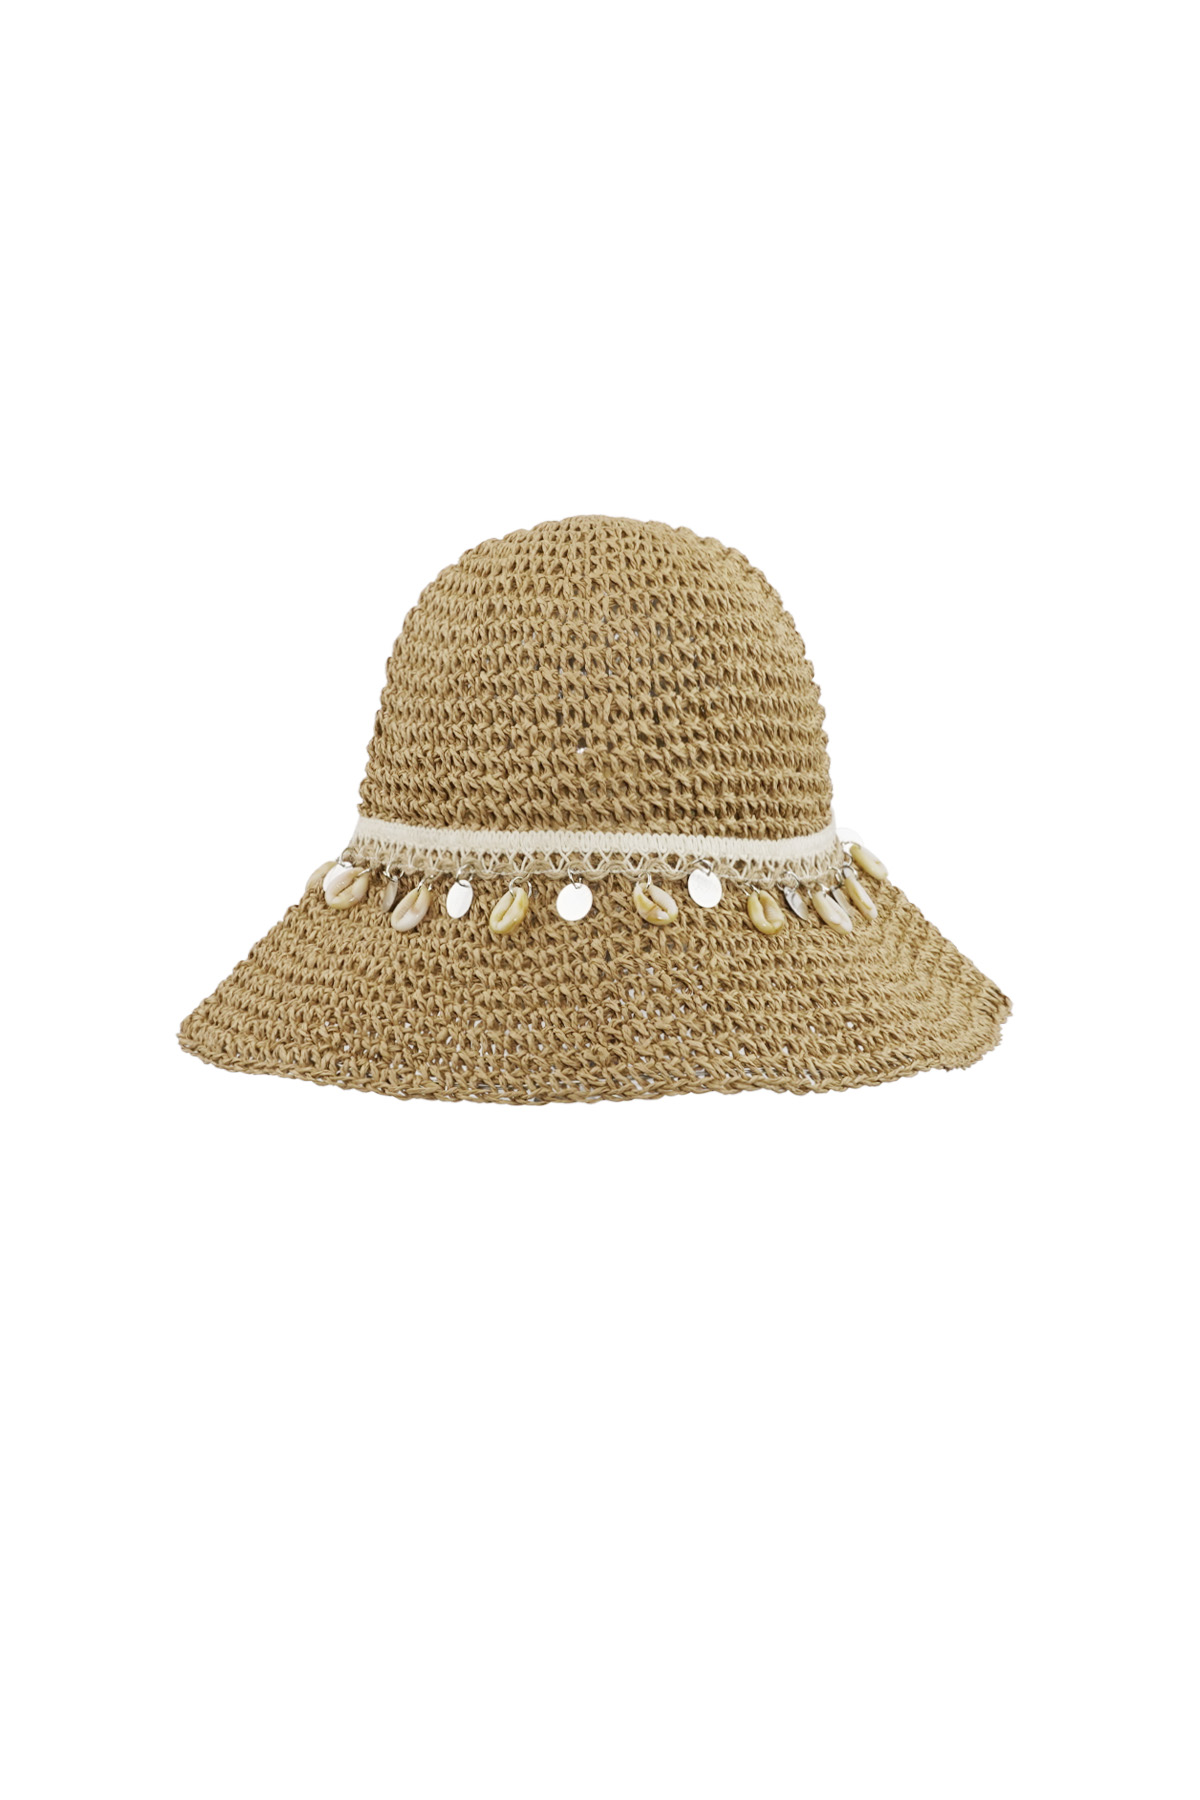 Beach hat with shells - brown h5 